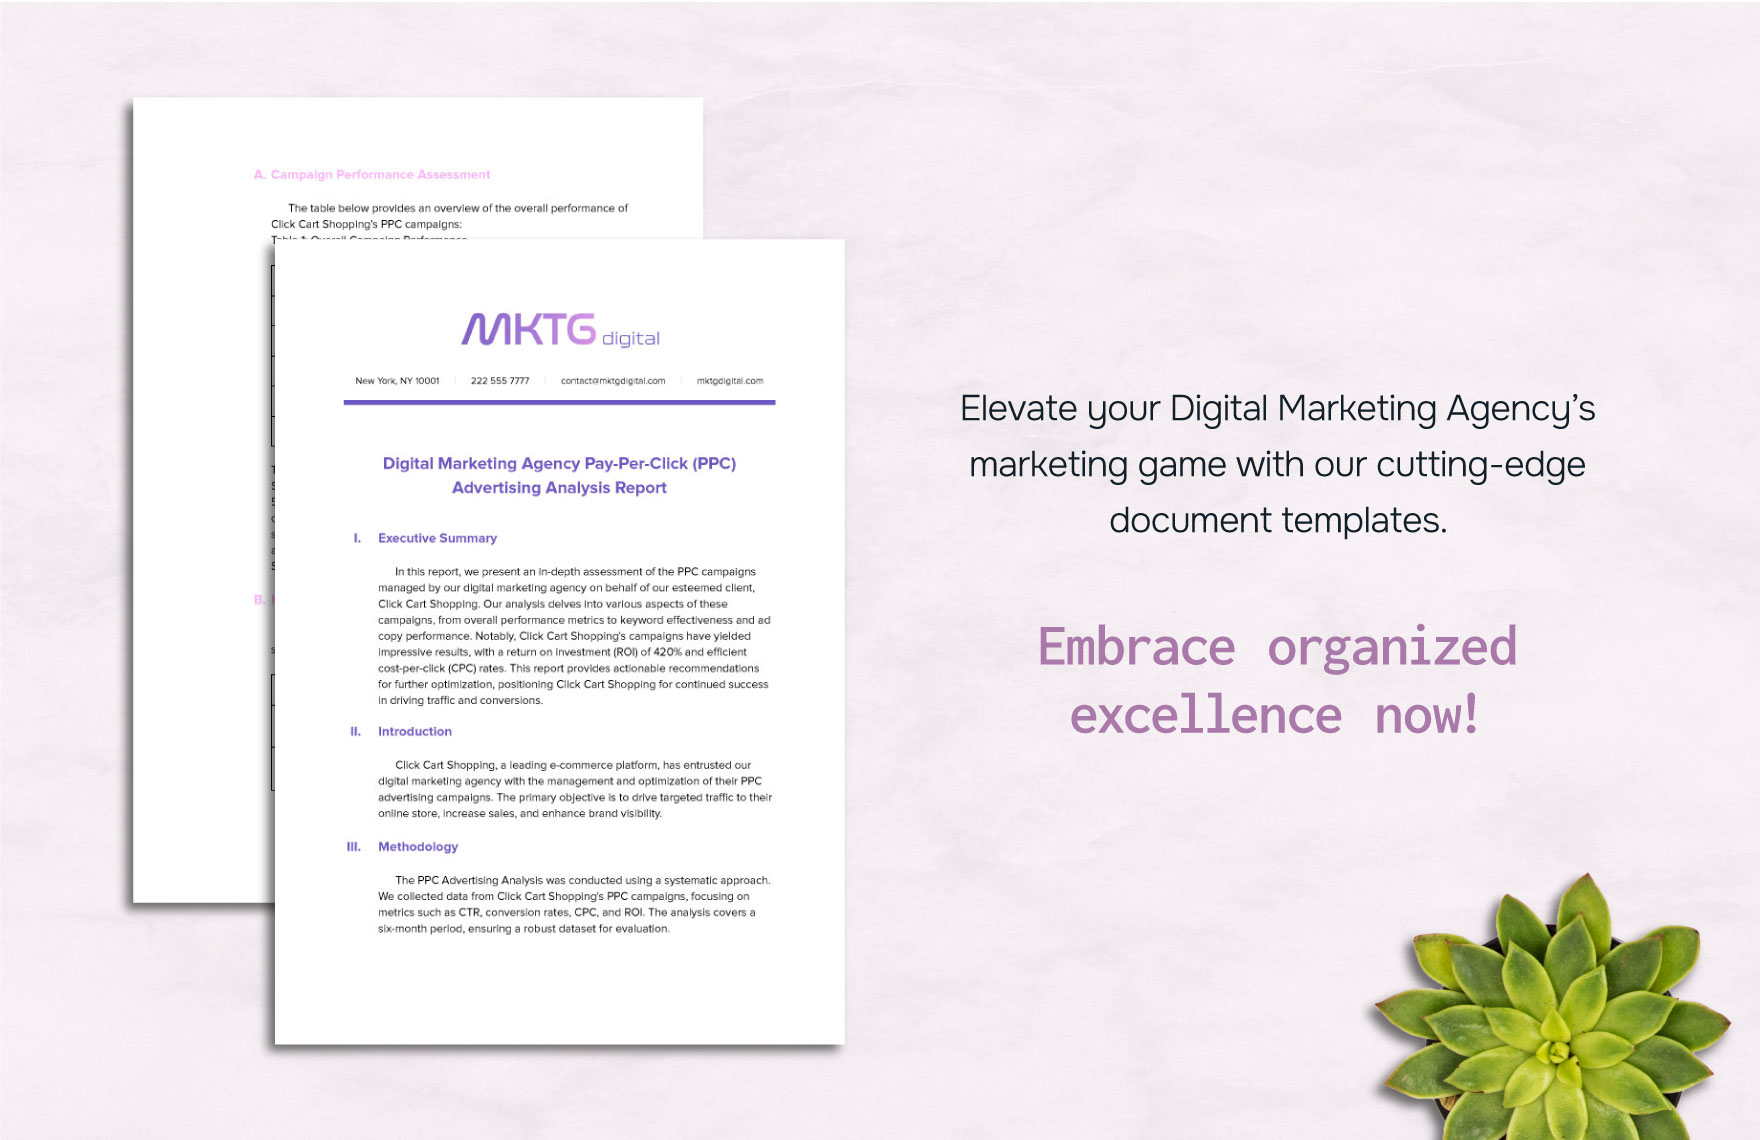 Digital Marketing Agency Pay-Per-Click (PPC) Advertising Analysis Report Template